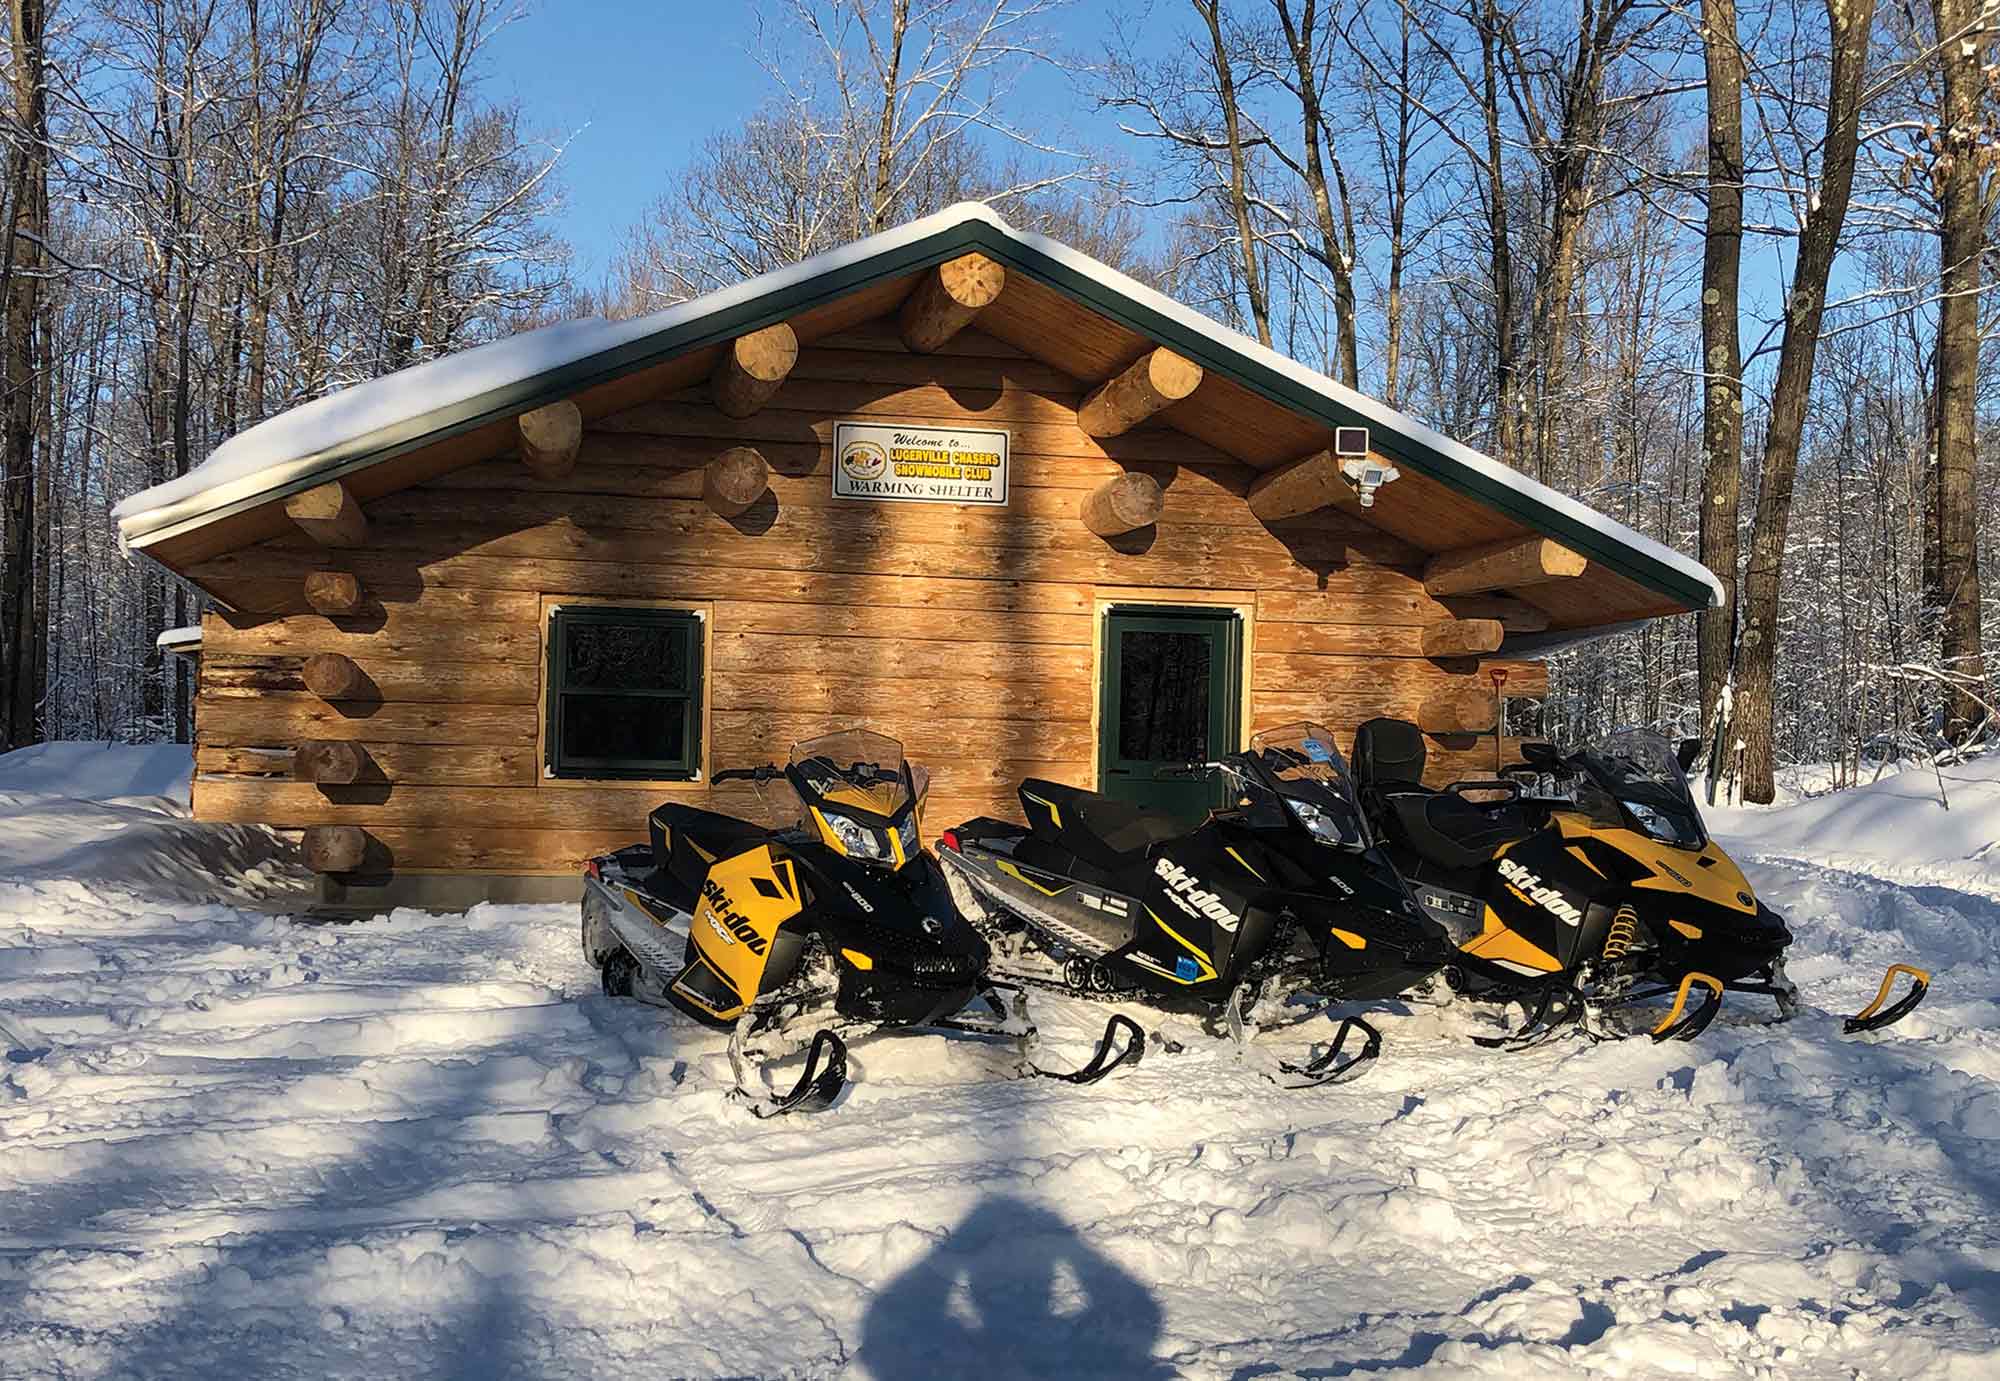 Snow Mobiles in front of a cabin in the snow